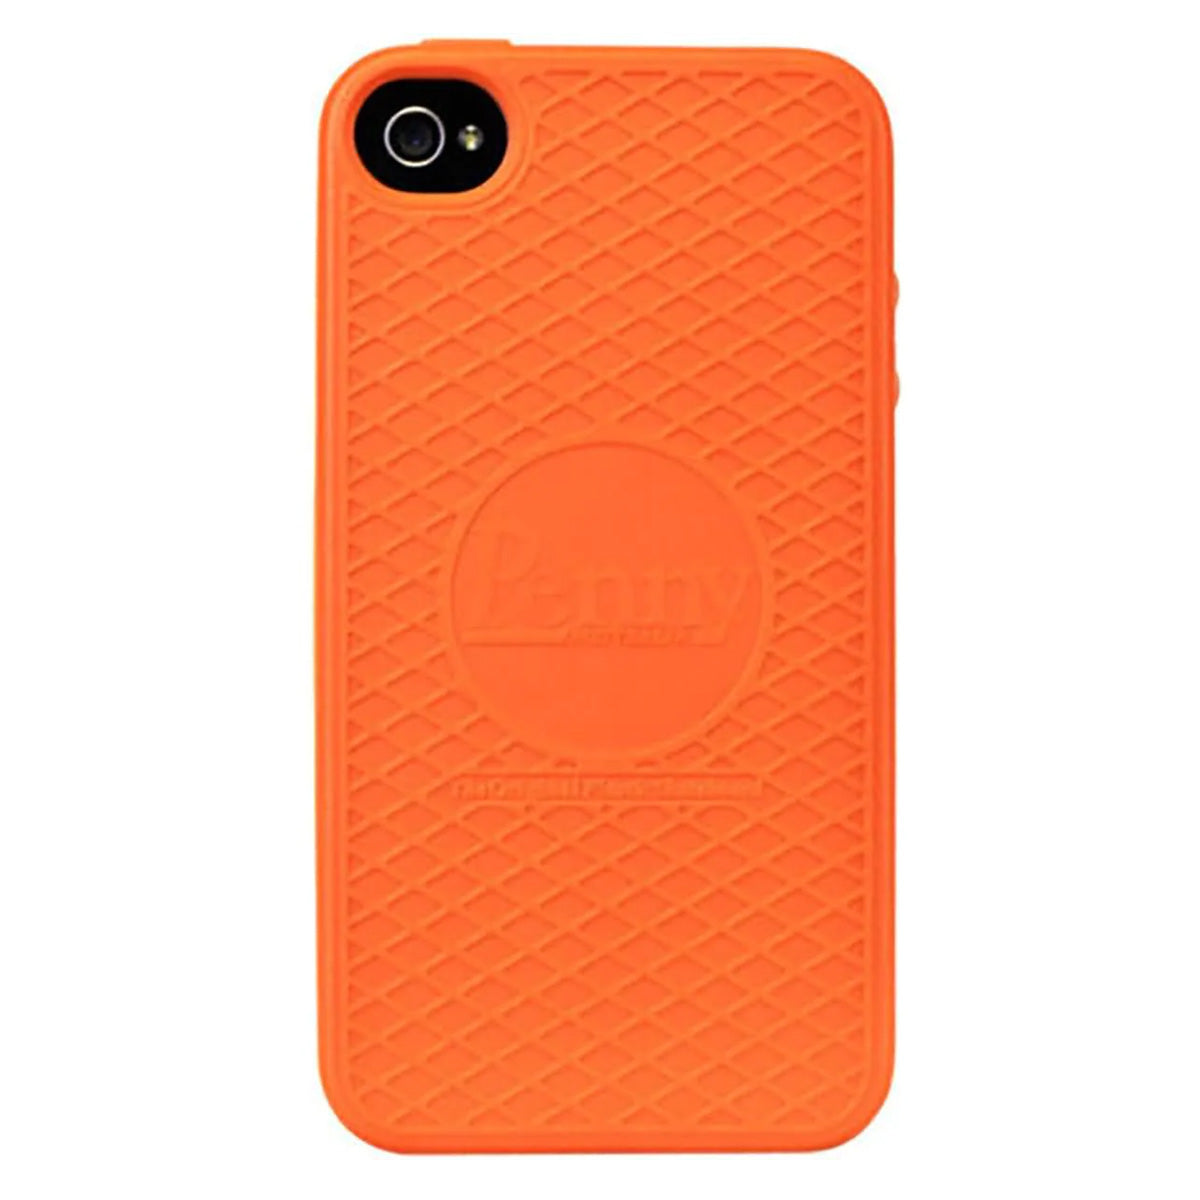 Penny Iphone 4/4s Case Phone Accessories 